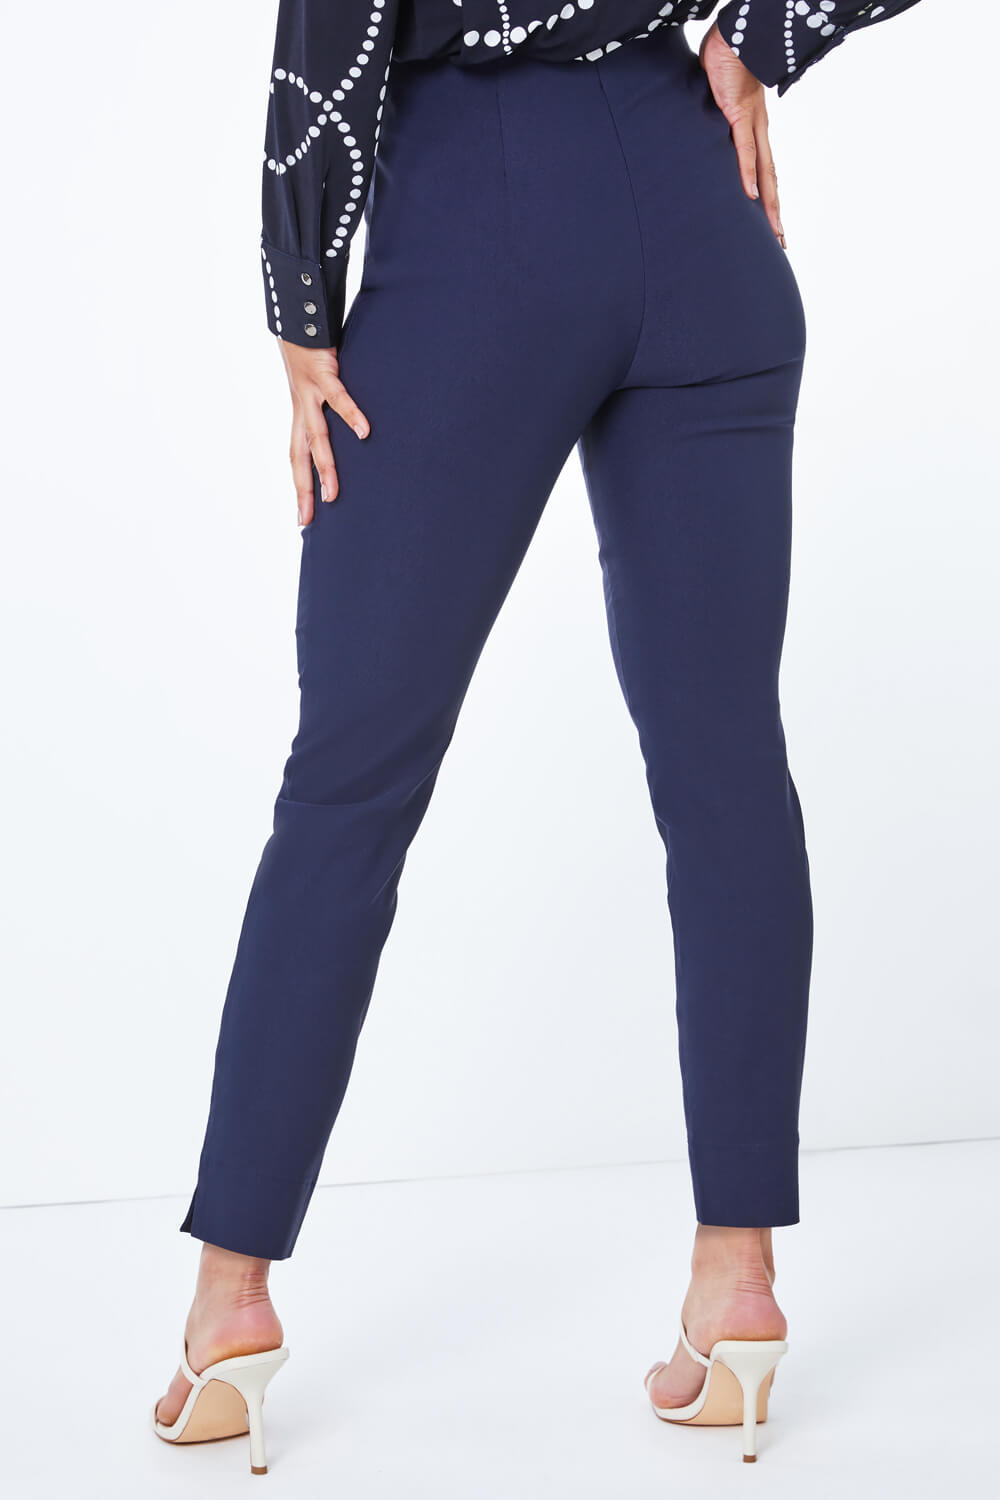 Navy  Petite Full Length Stretch Trousers, Image 3 of 4